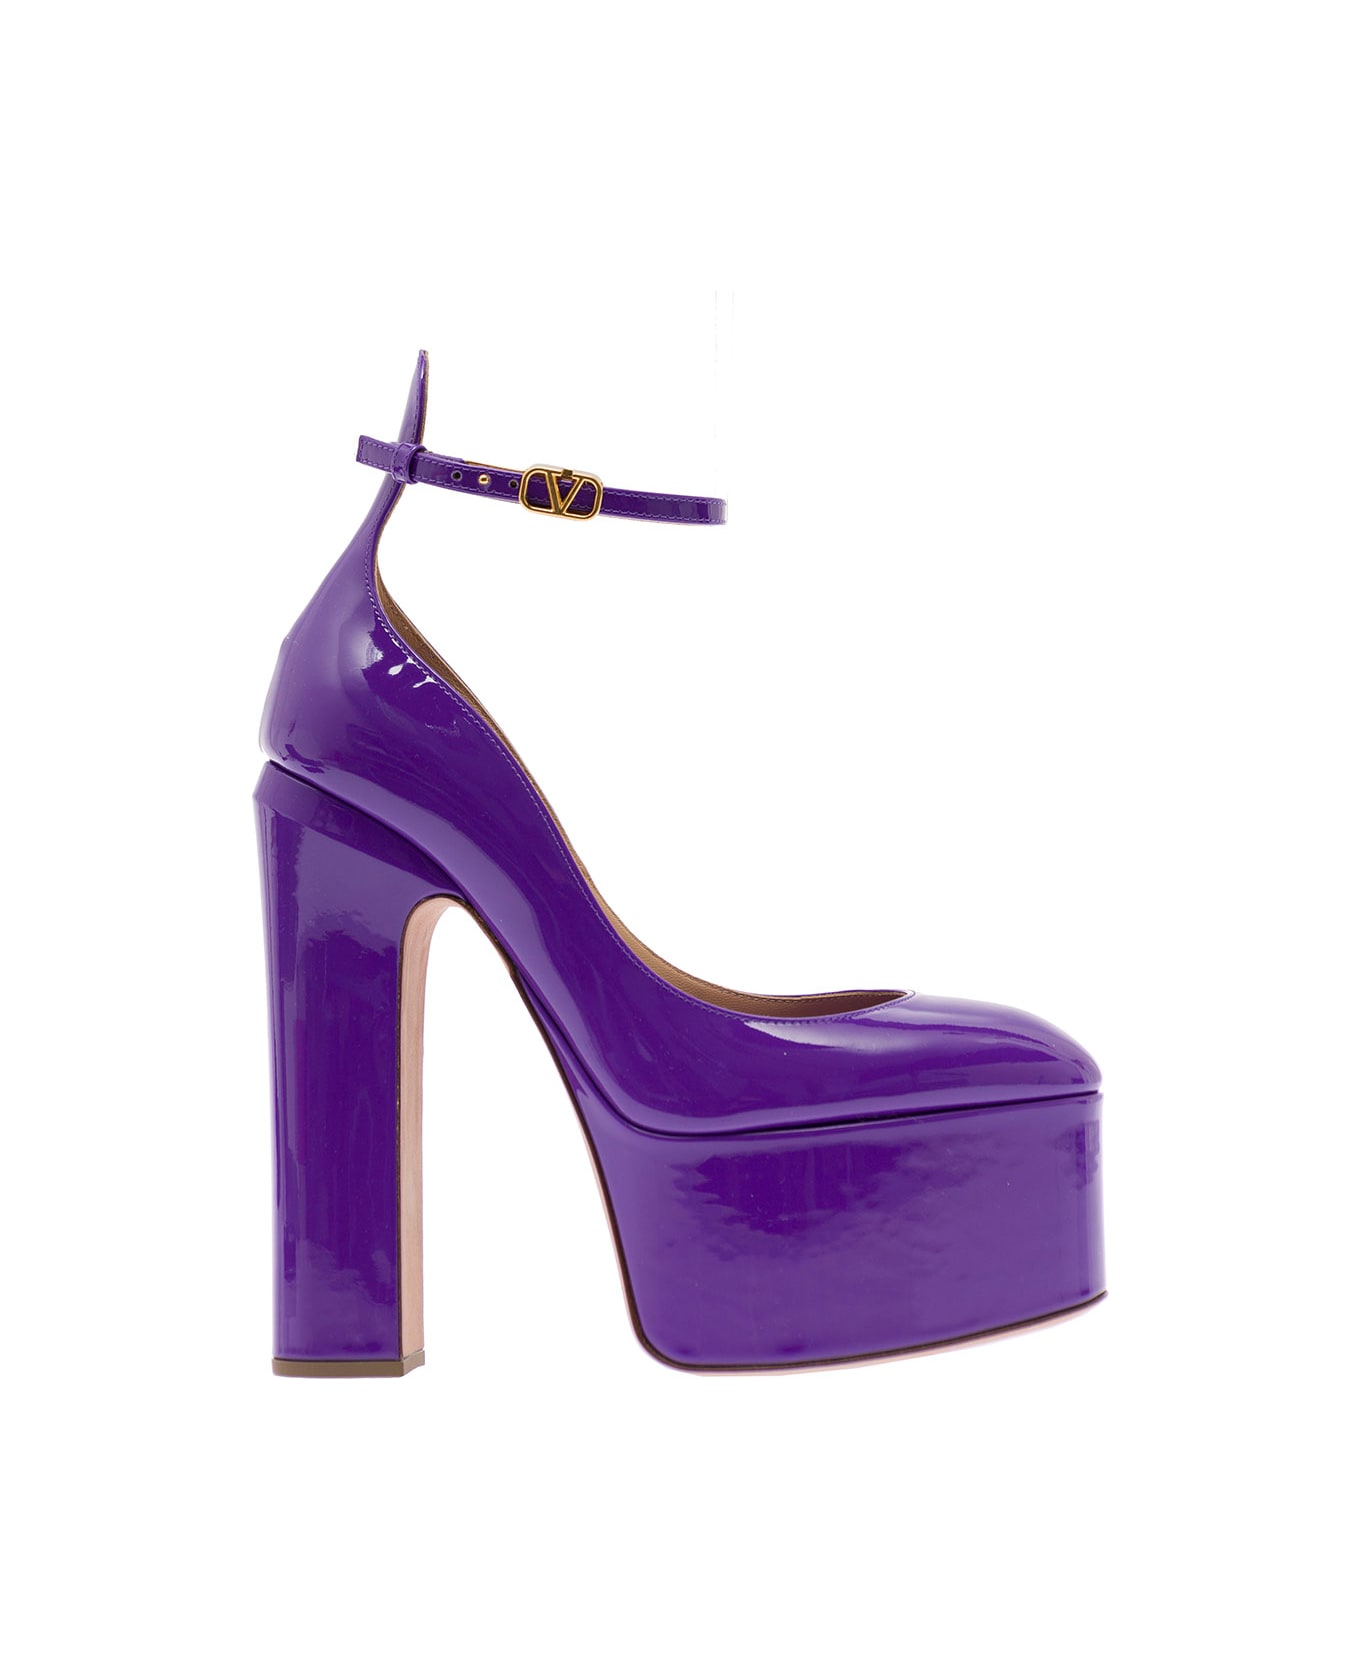 Valentino Garavani 'tan-go' Purple Décolleté With Platform And Vlogo Buckle In Patent Leather Woman - Violet ハイヒール